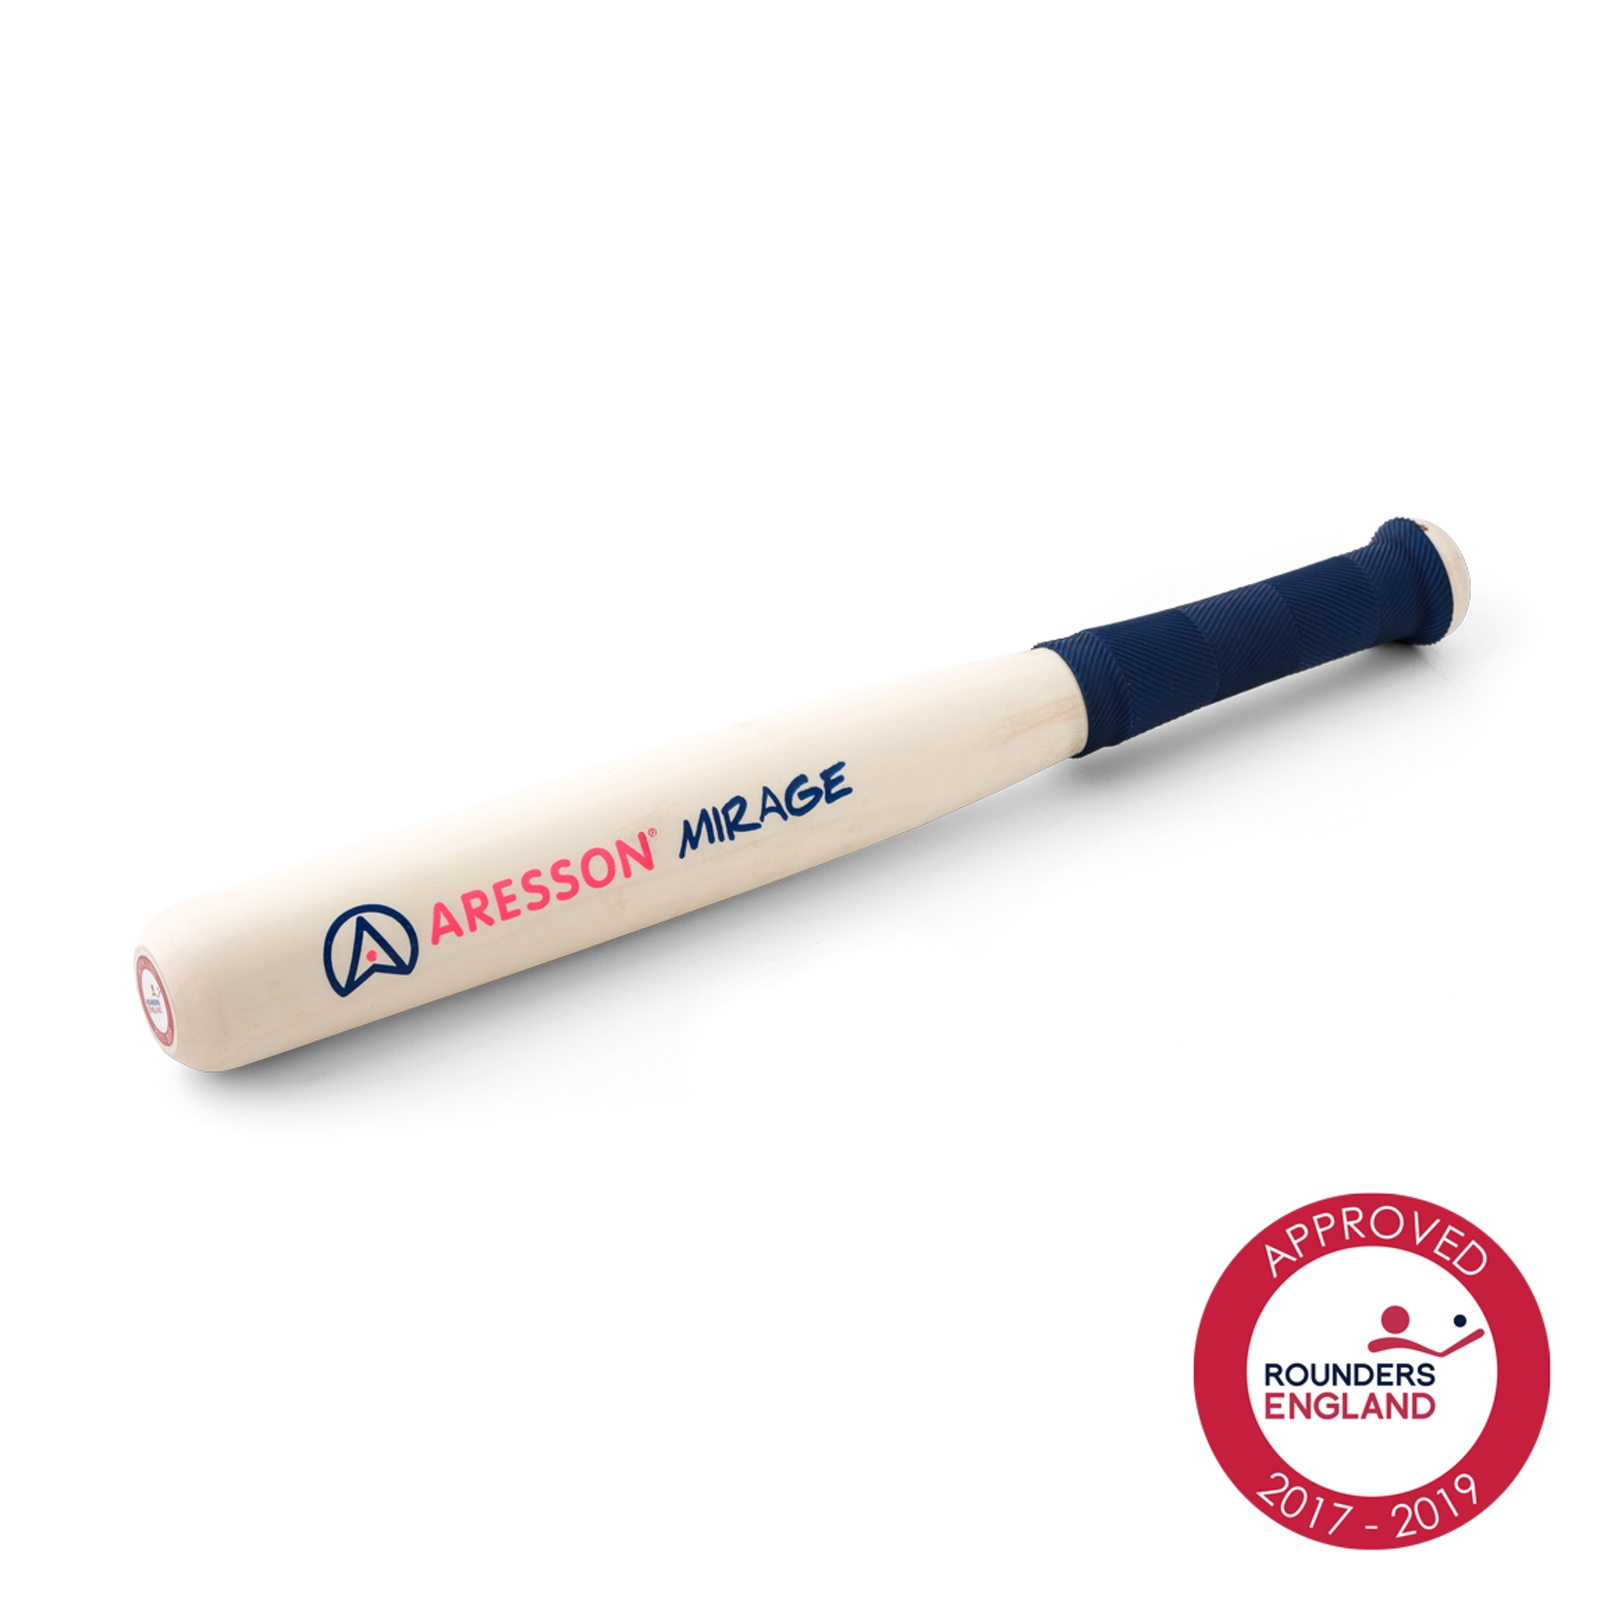 Aresson Mirage Rounders Bat